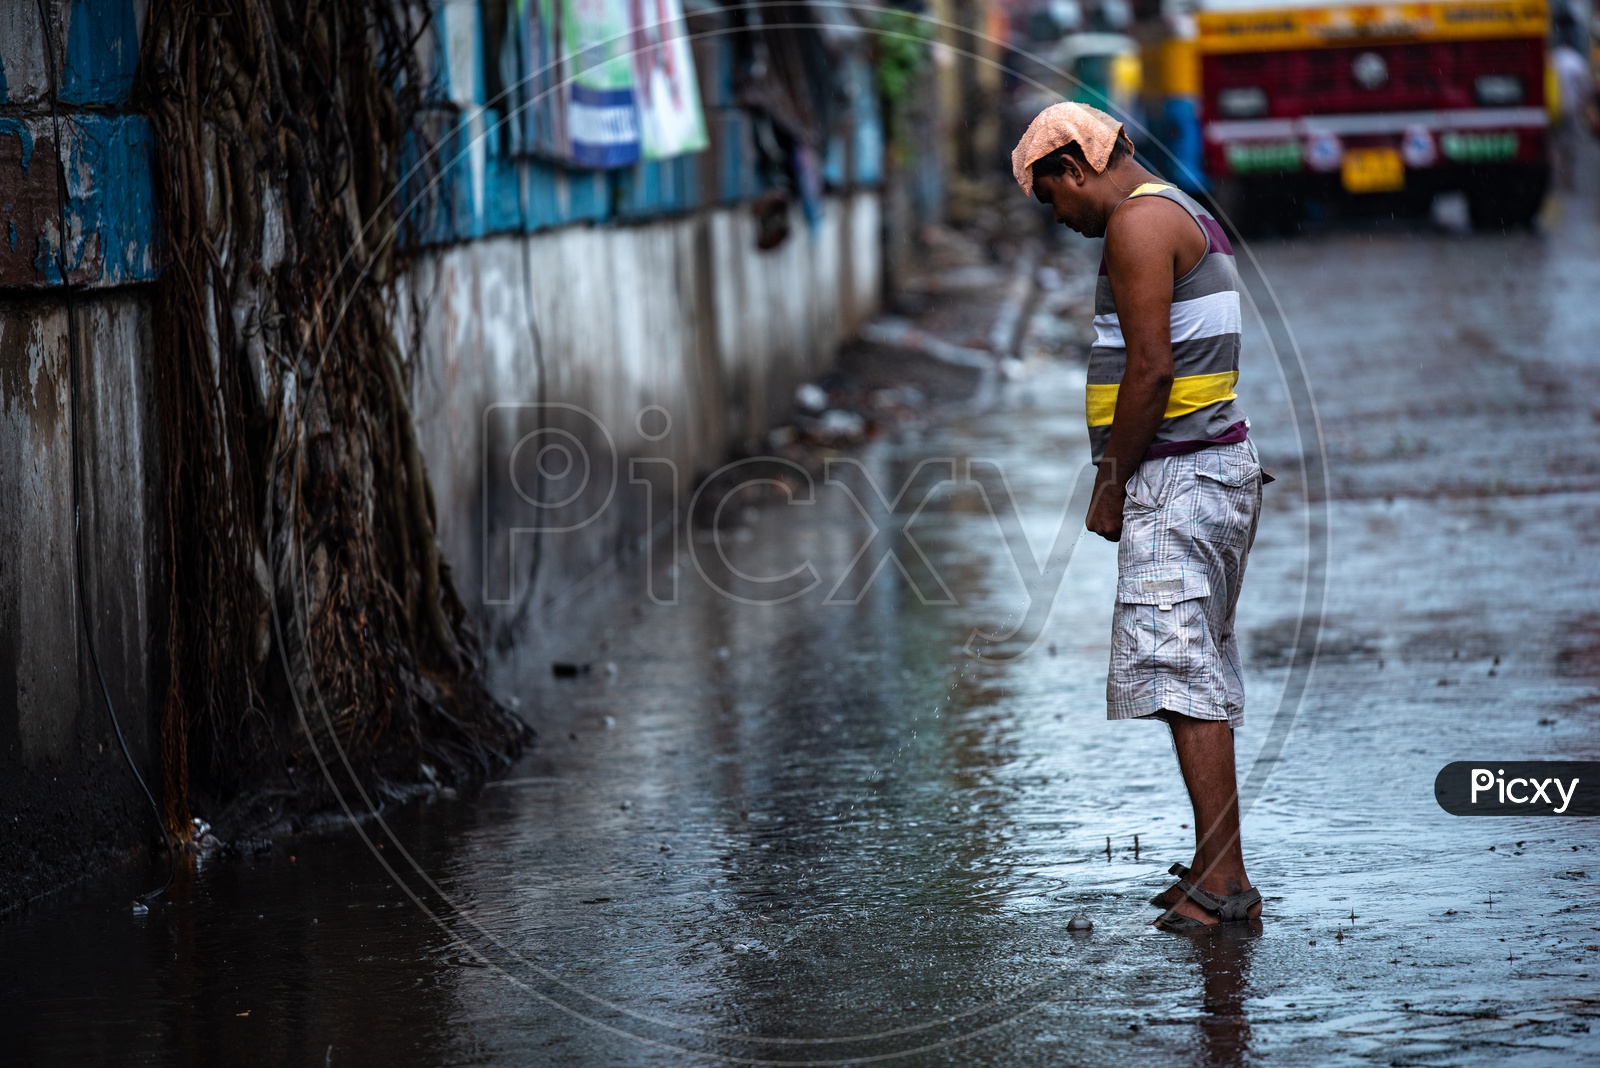 Image Of A Man Peeingpublic Urination On Over Flooded Roads In Kolkata Due To Cyclone Fani